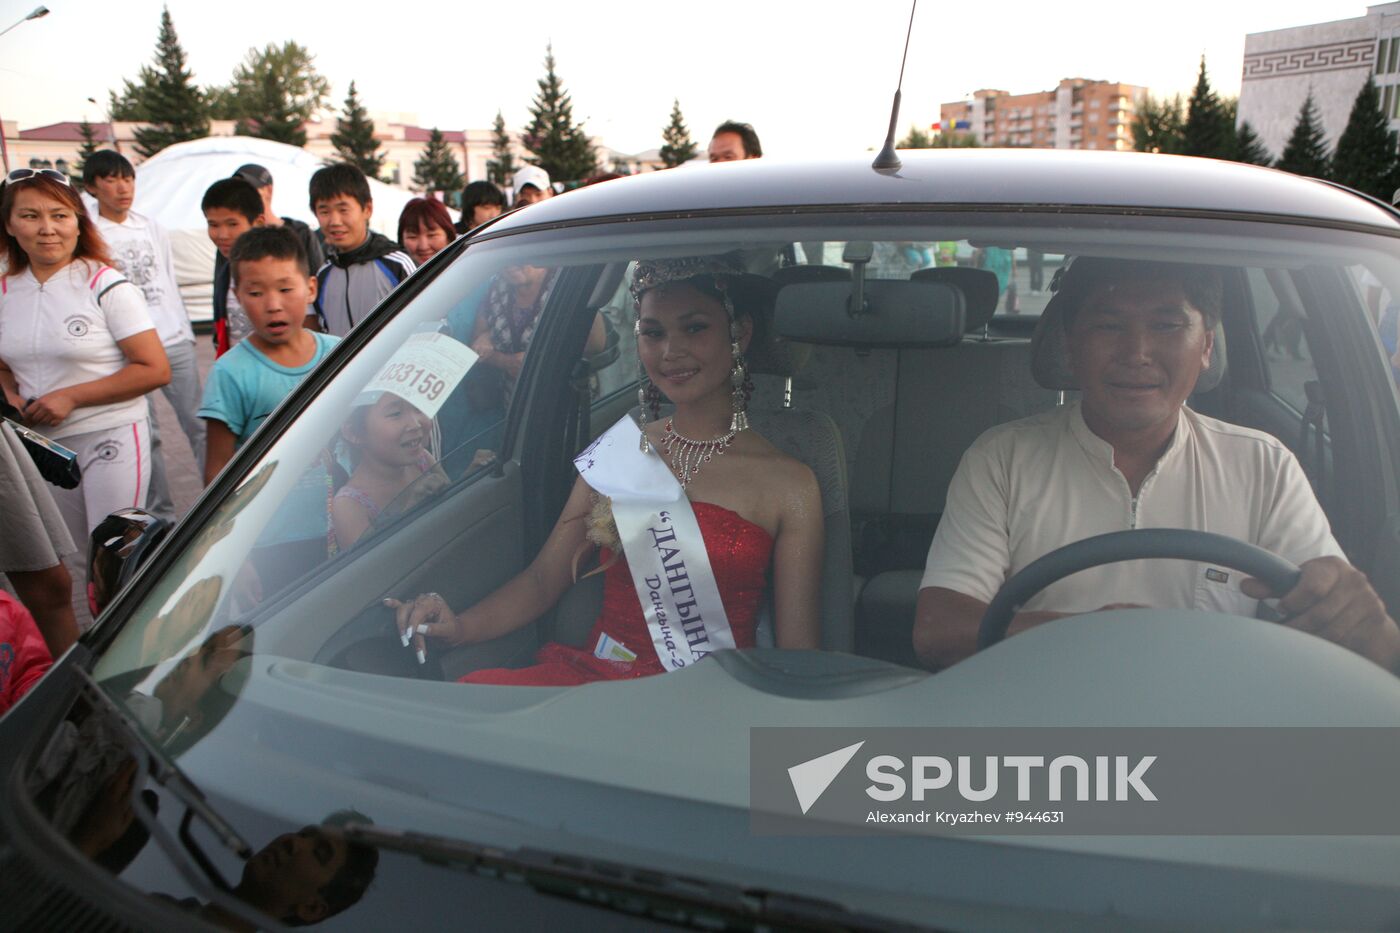 Dangyna-2011 beauty competition